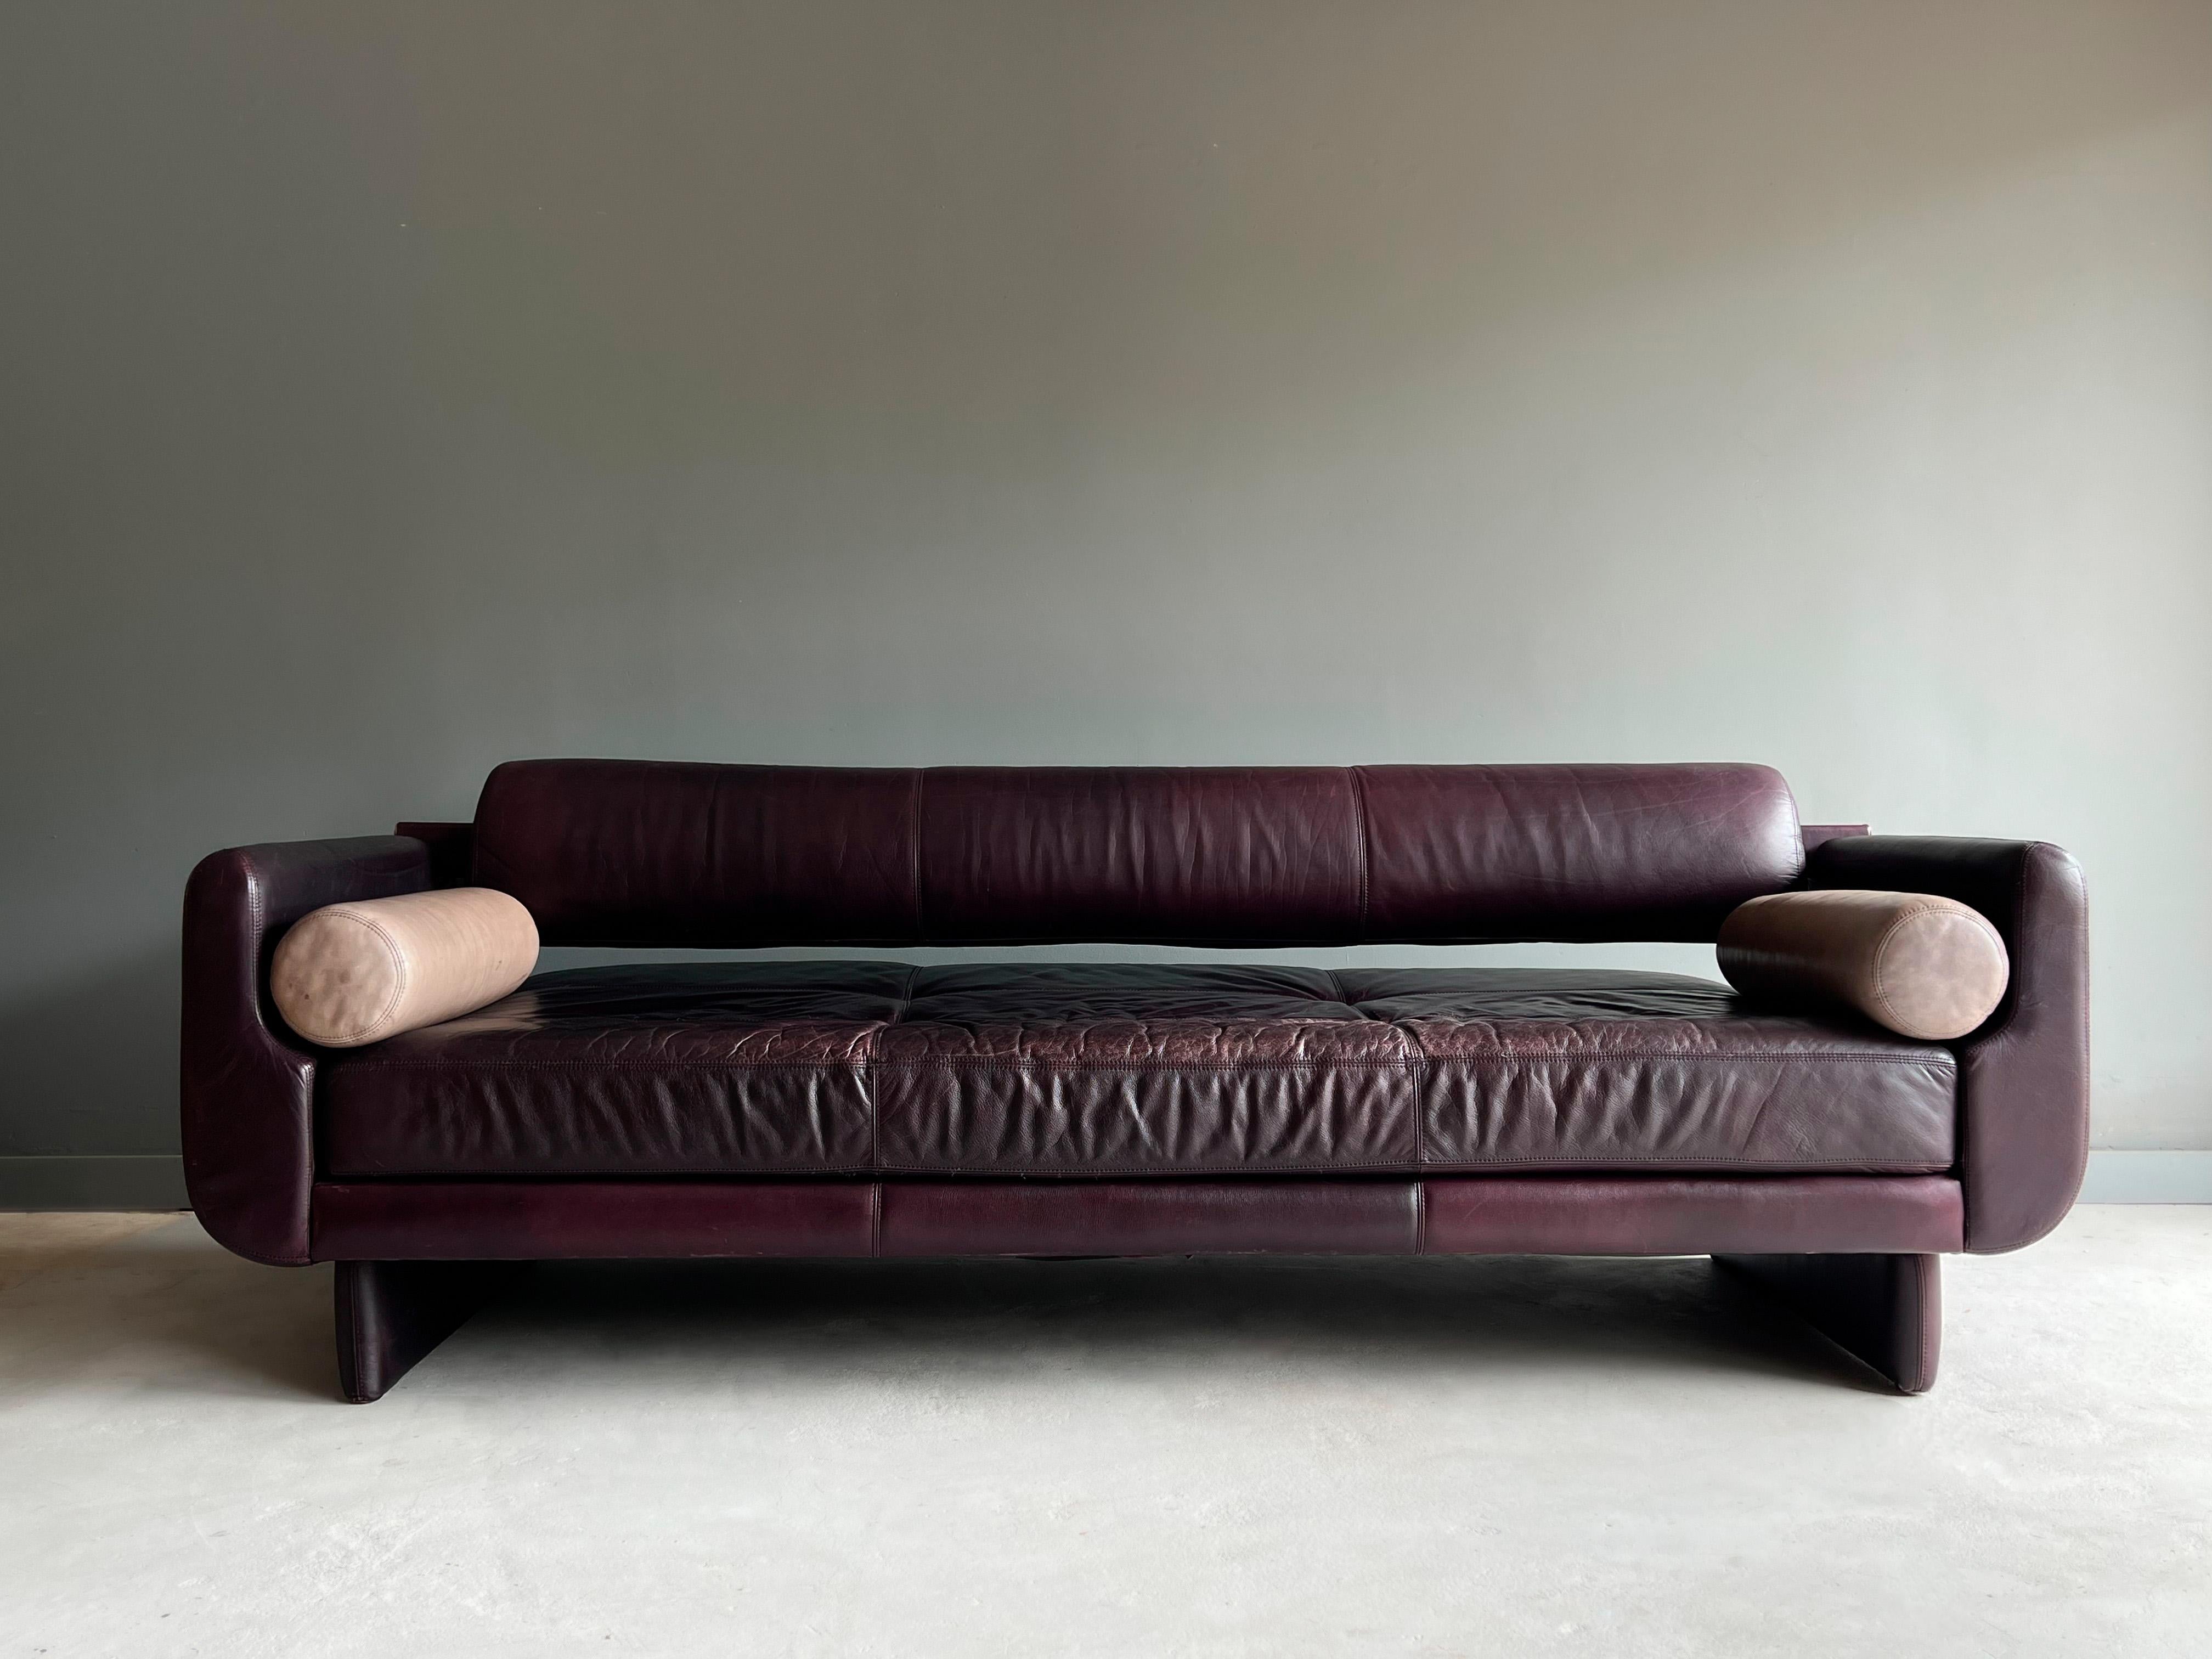 Beautiful designer leather sofa or daybed designed by Vladimir Kagan for American Leather. 

The sofa is comprised of two removable bolster accent pillows and long bolster. The removal of the back bolster converts the sofa to a daybed. 

This